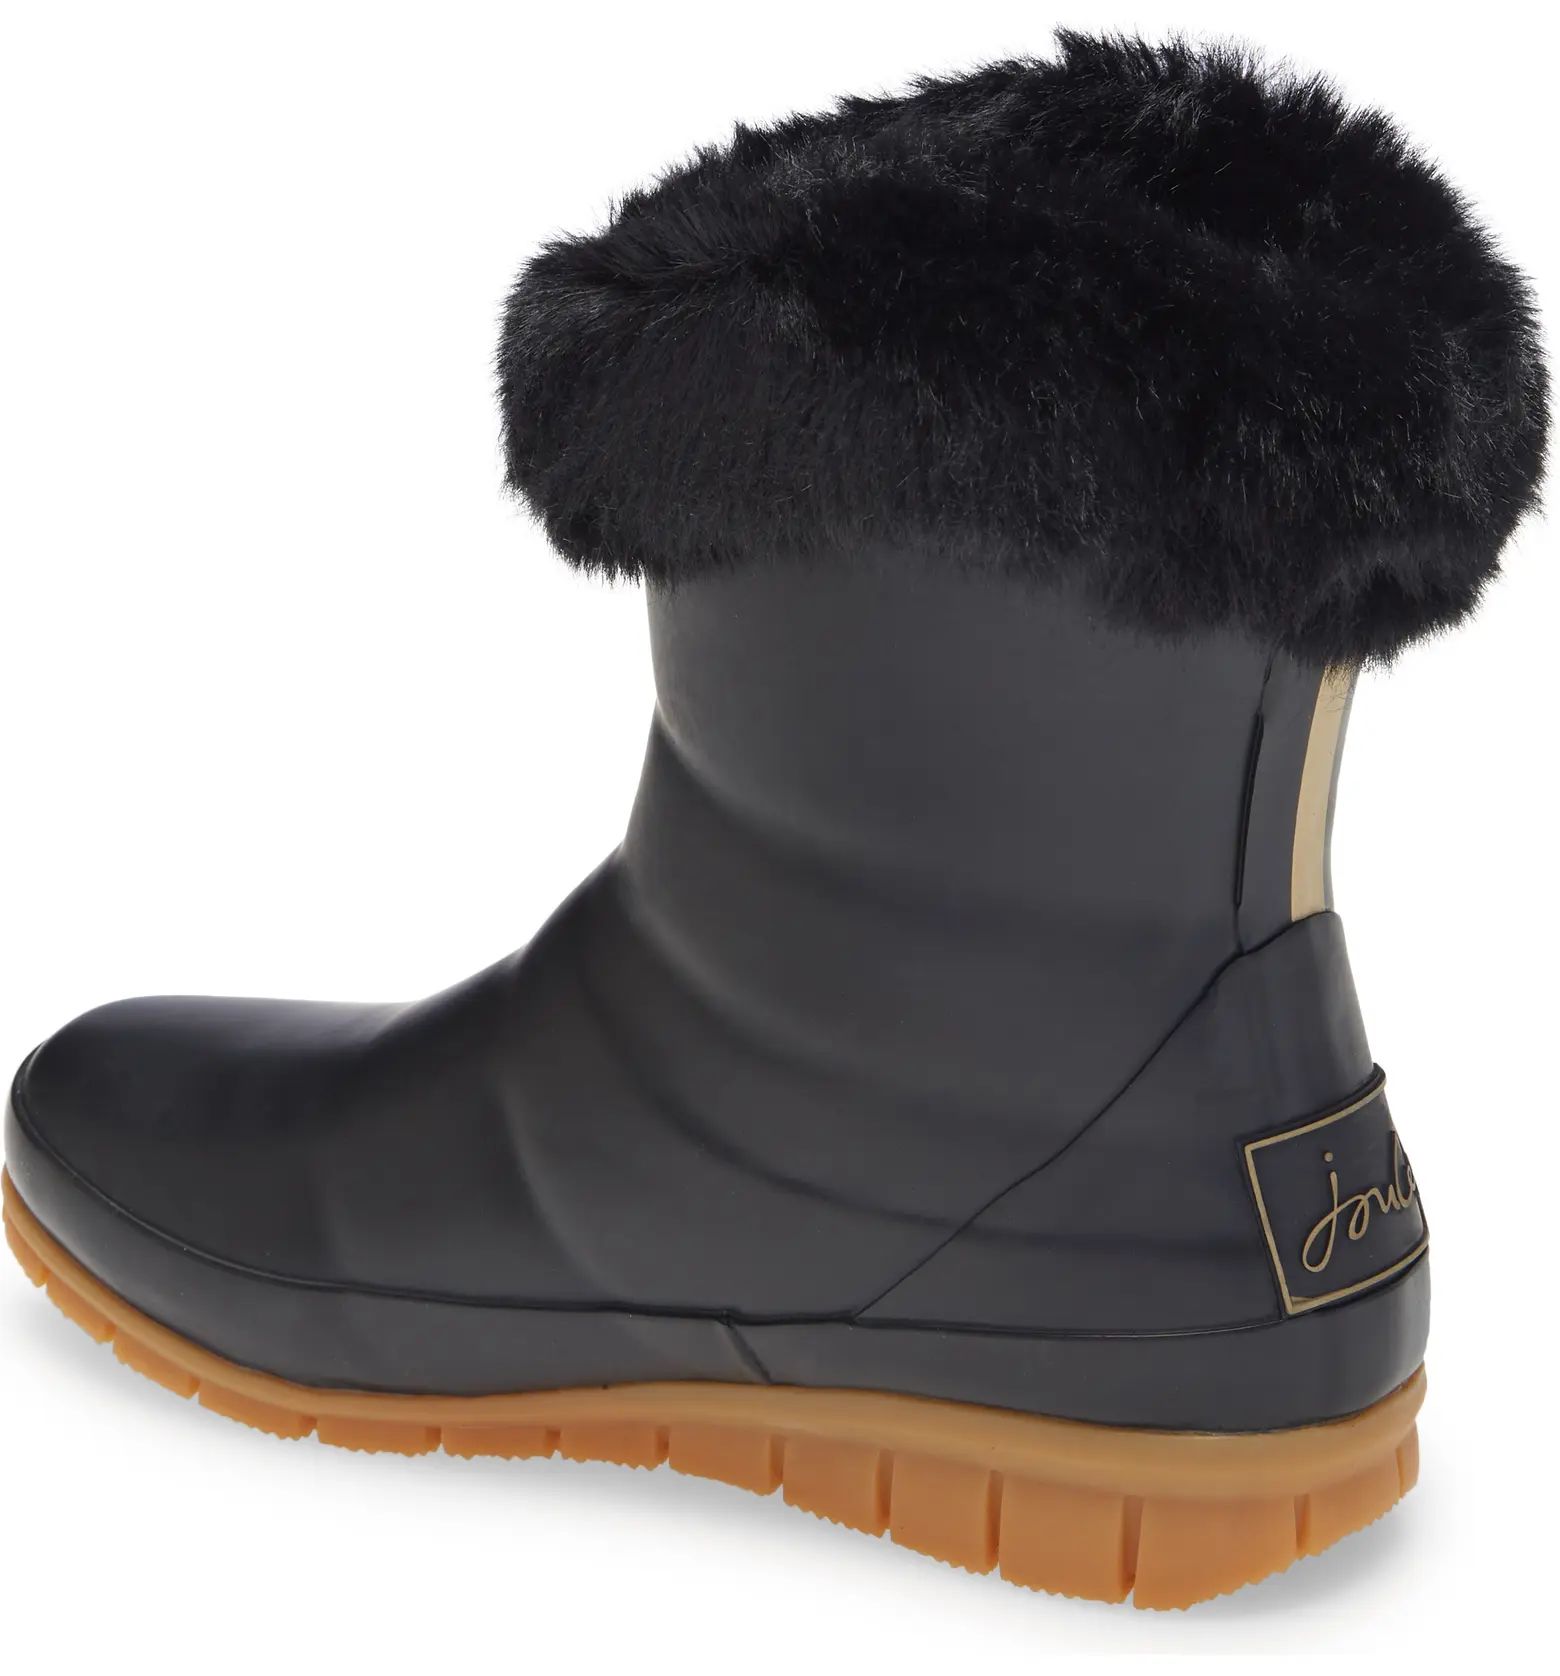 Chilton Waterproof Bootie with Faux Fur Collar | Nordstrom Rack